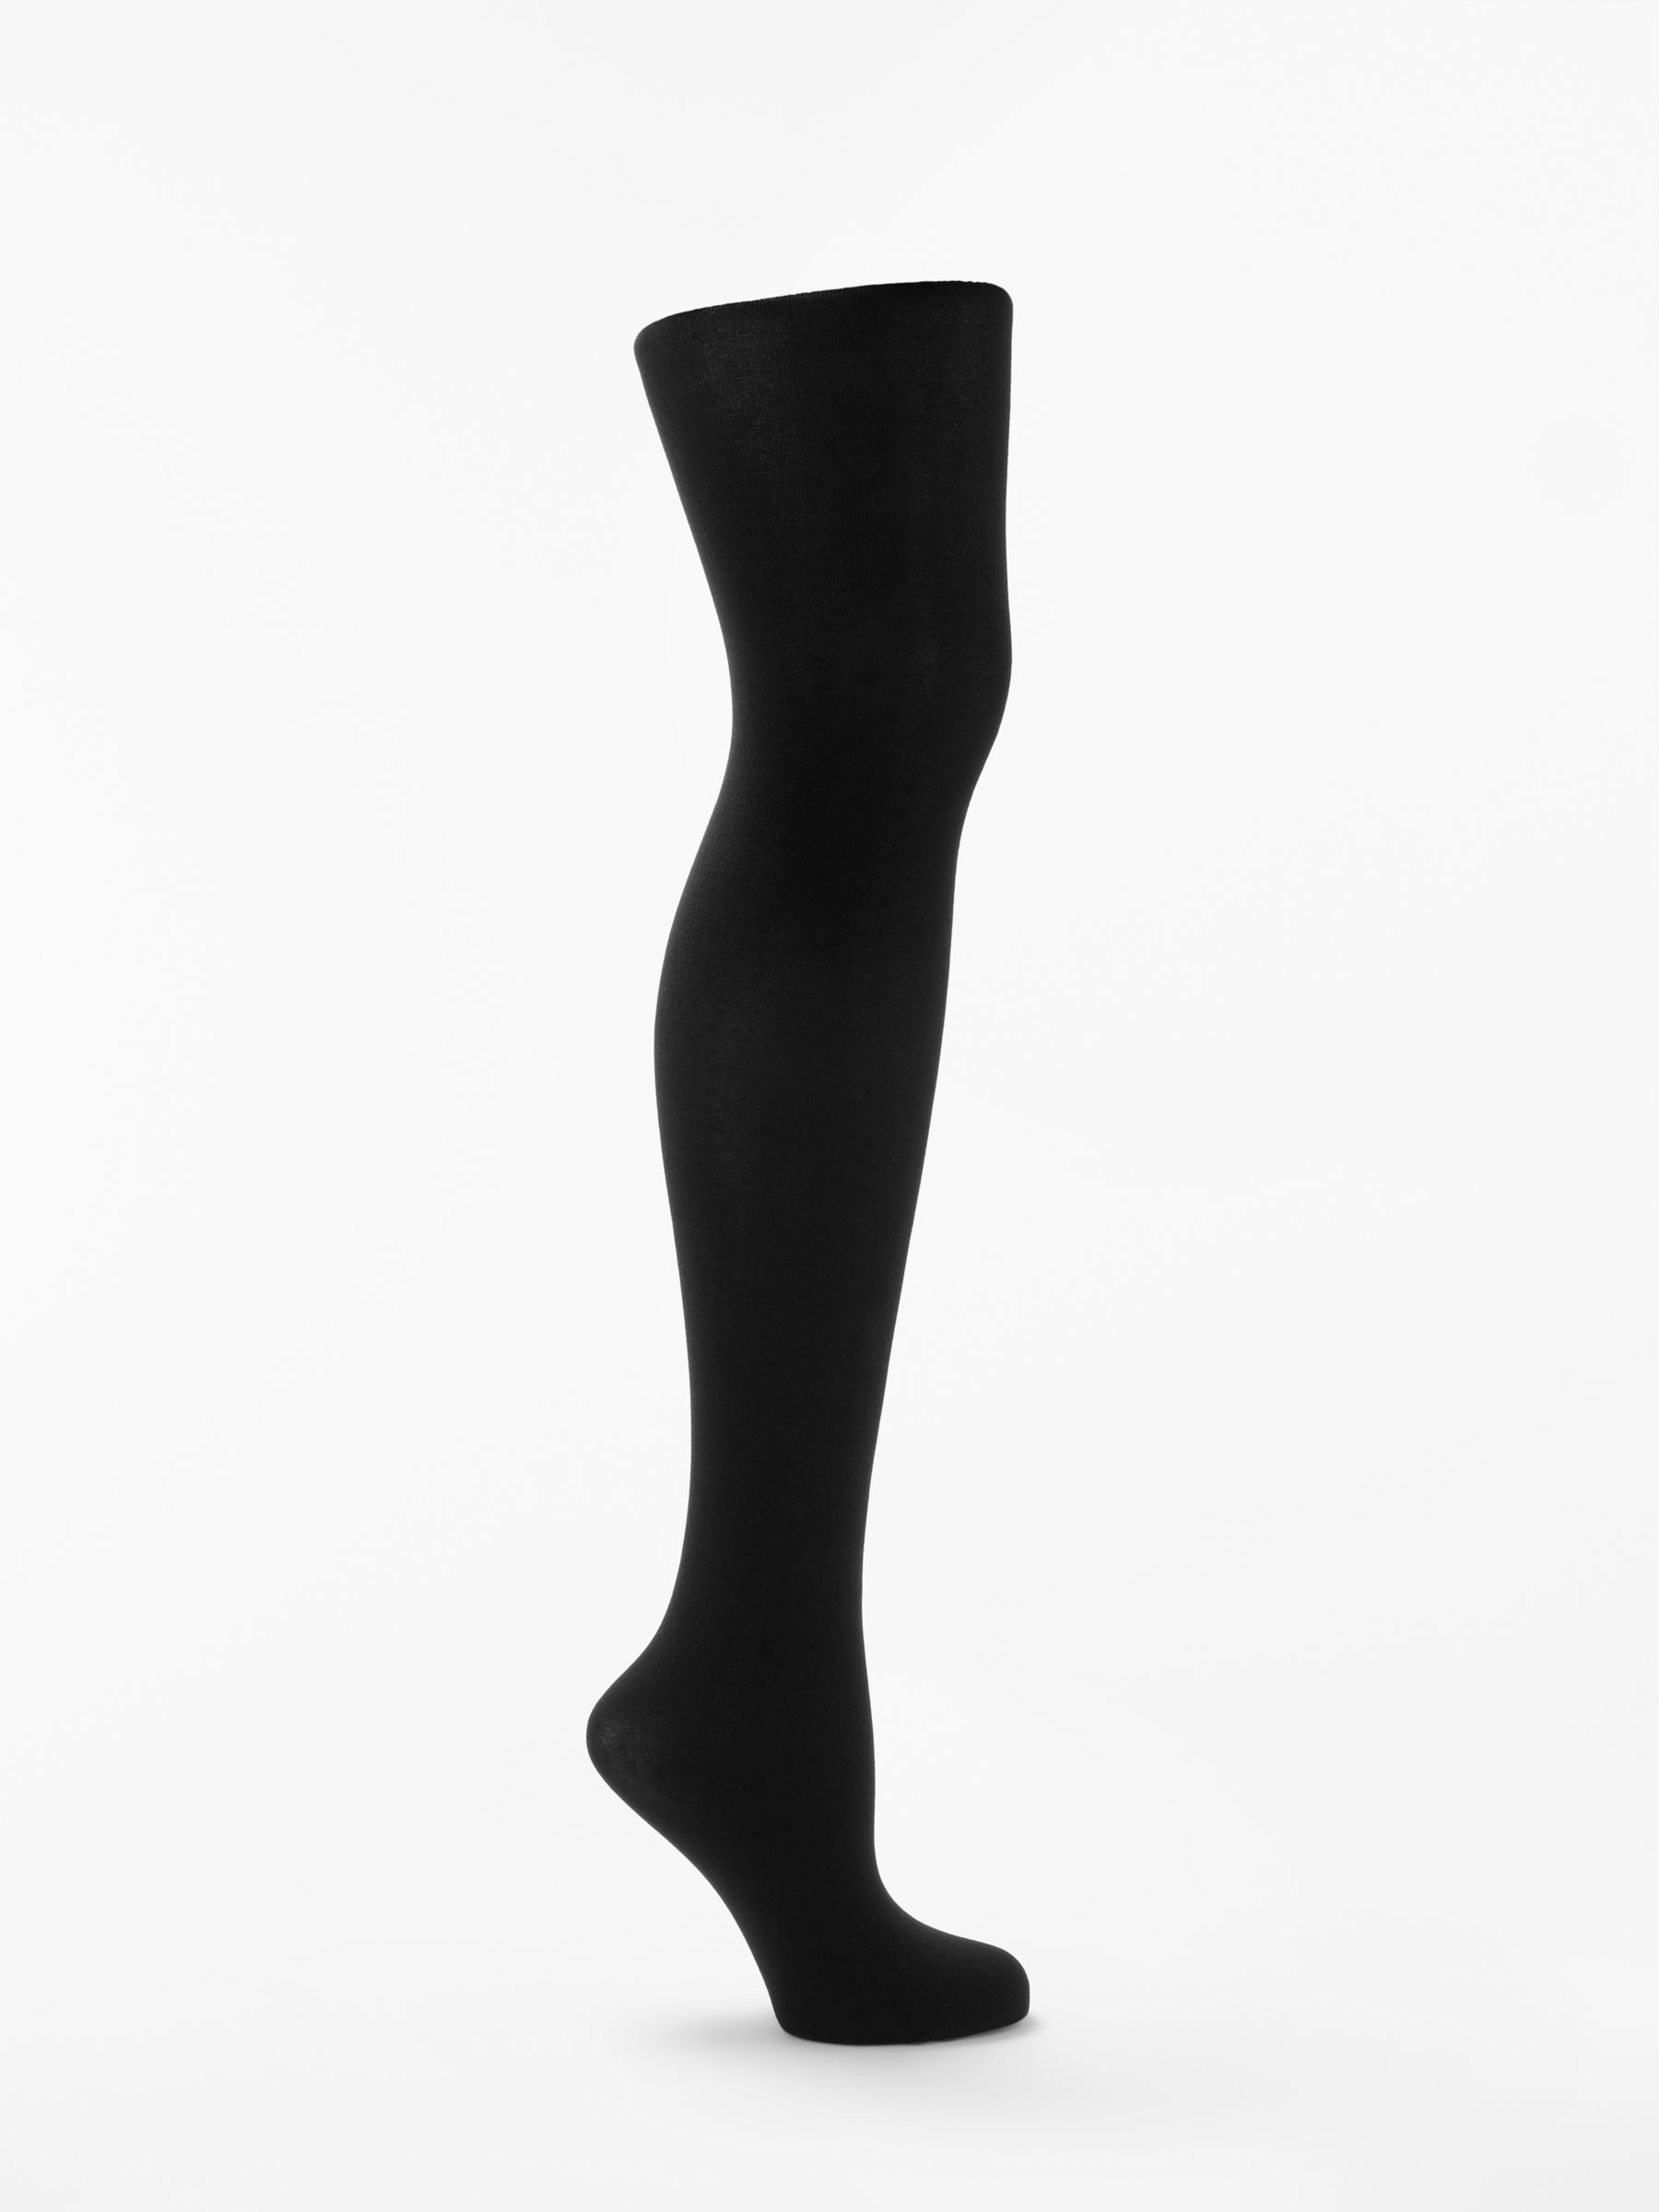 John Lewis & Partners Extra Fine Egyptian Cotton Blend Opaque Tights